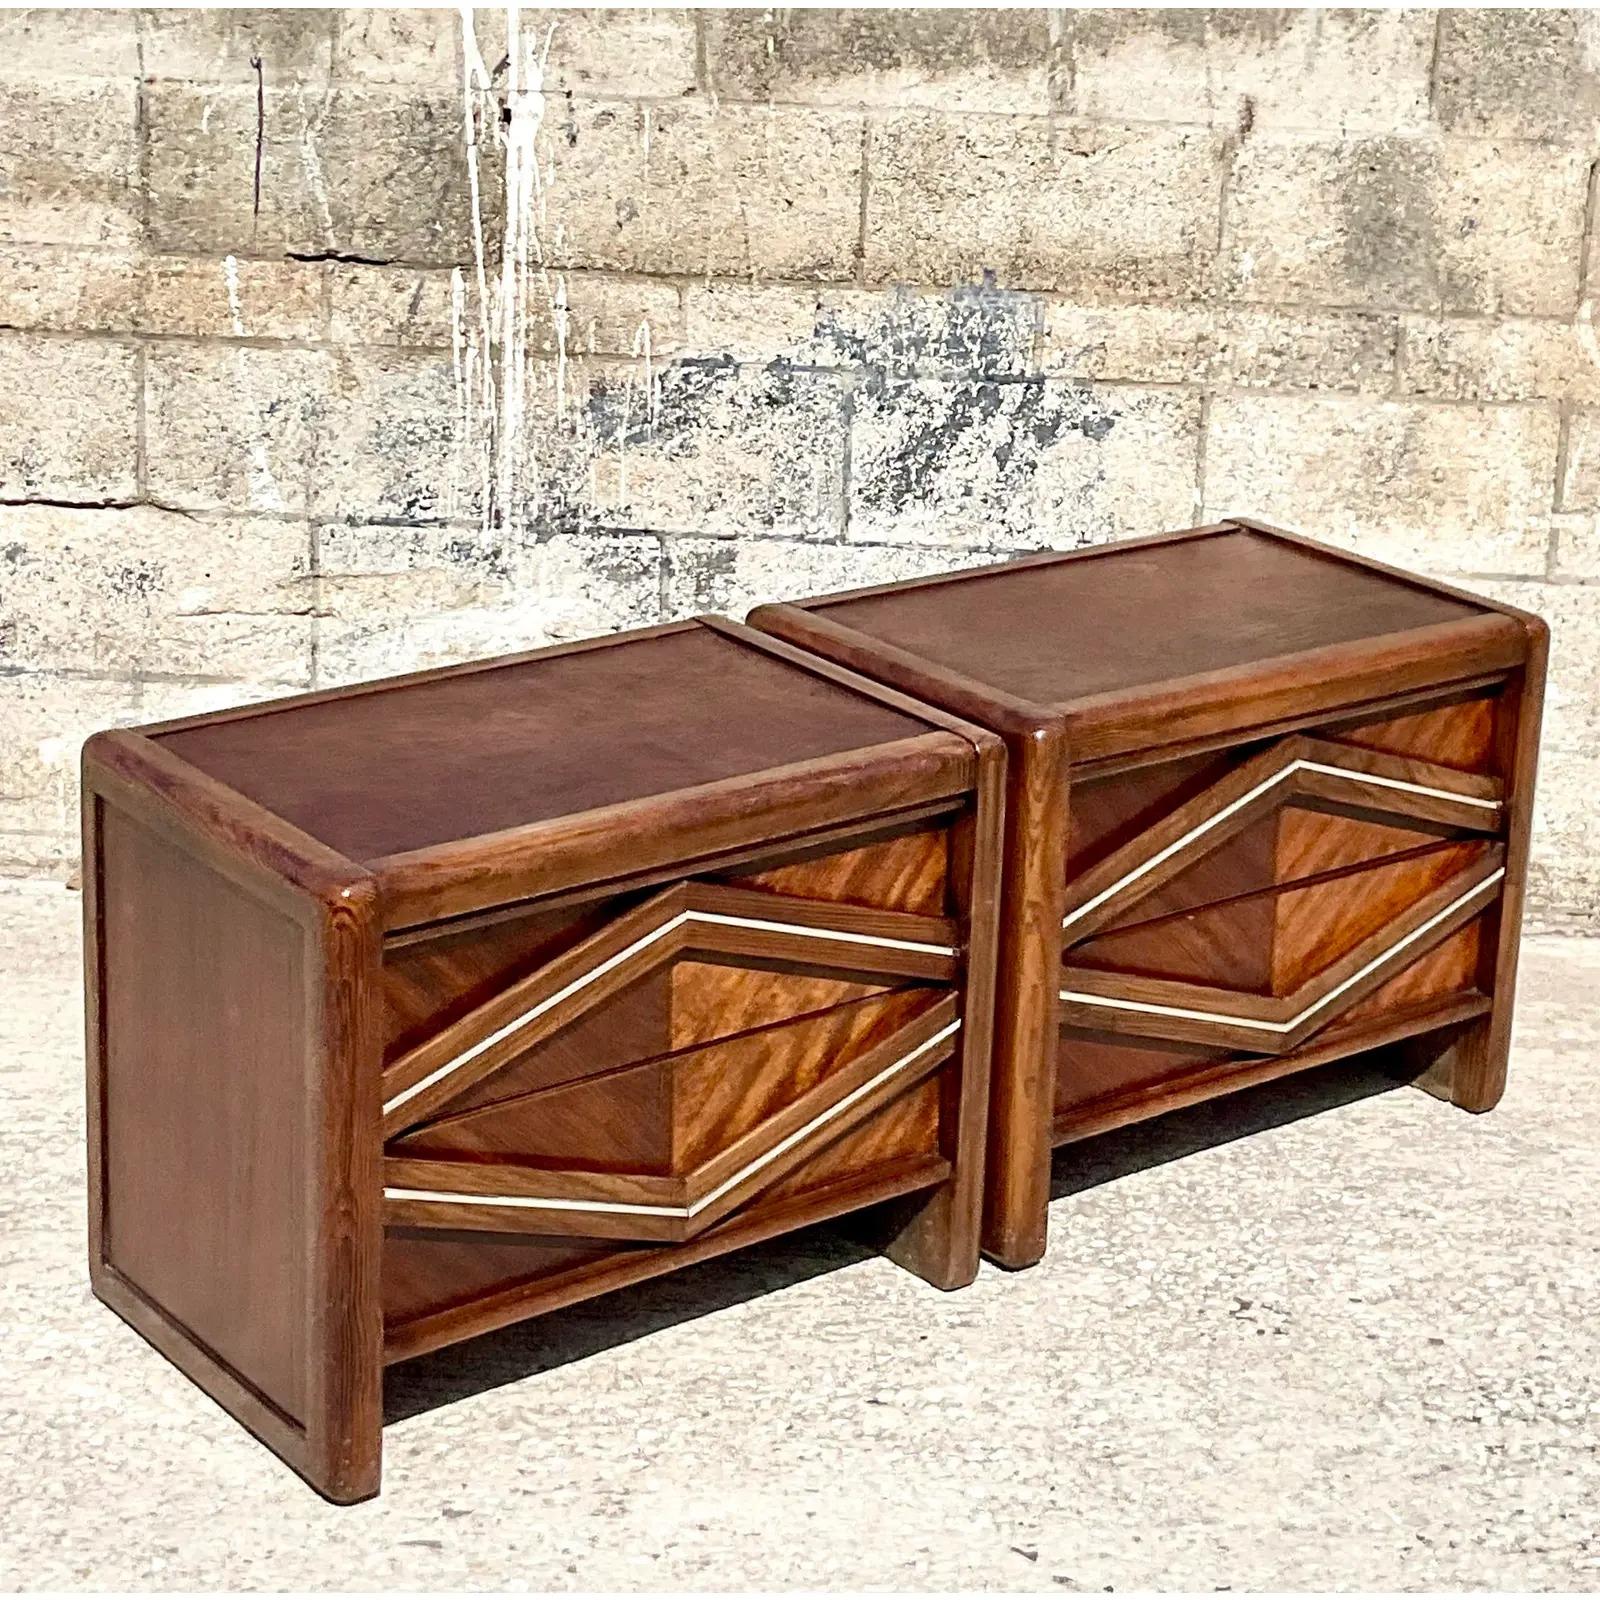 Fantastic pair of vintage MCM nightstands. Made by the iconic Pulaski group. Chic chrome diamond design. Acquired from a Palm Beach estate.